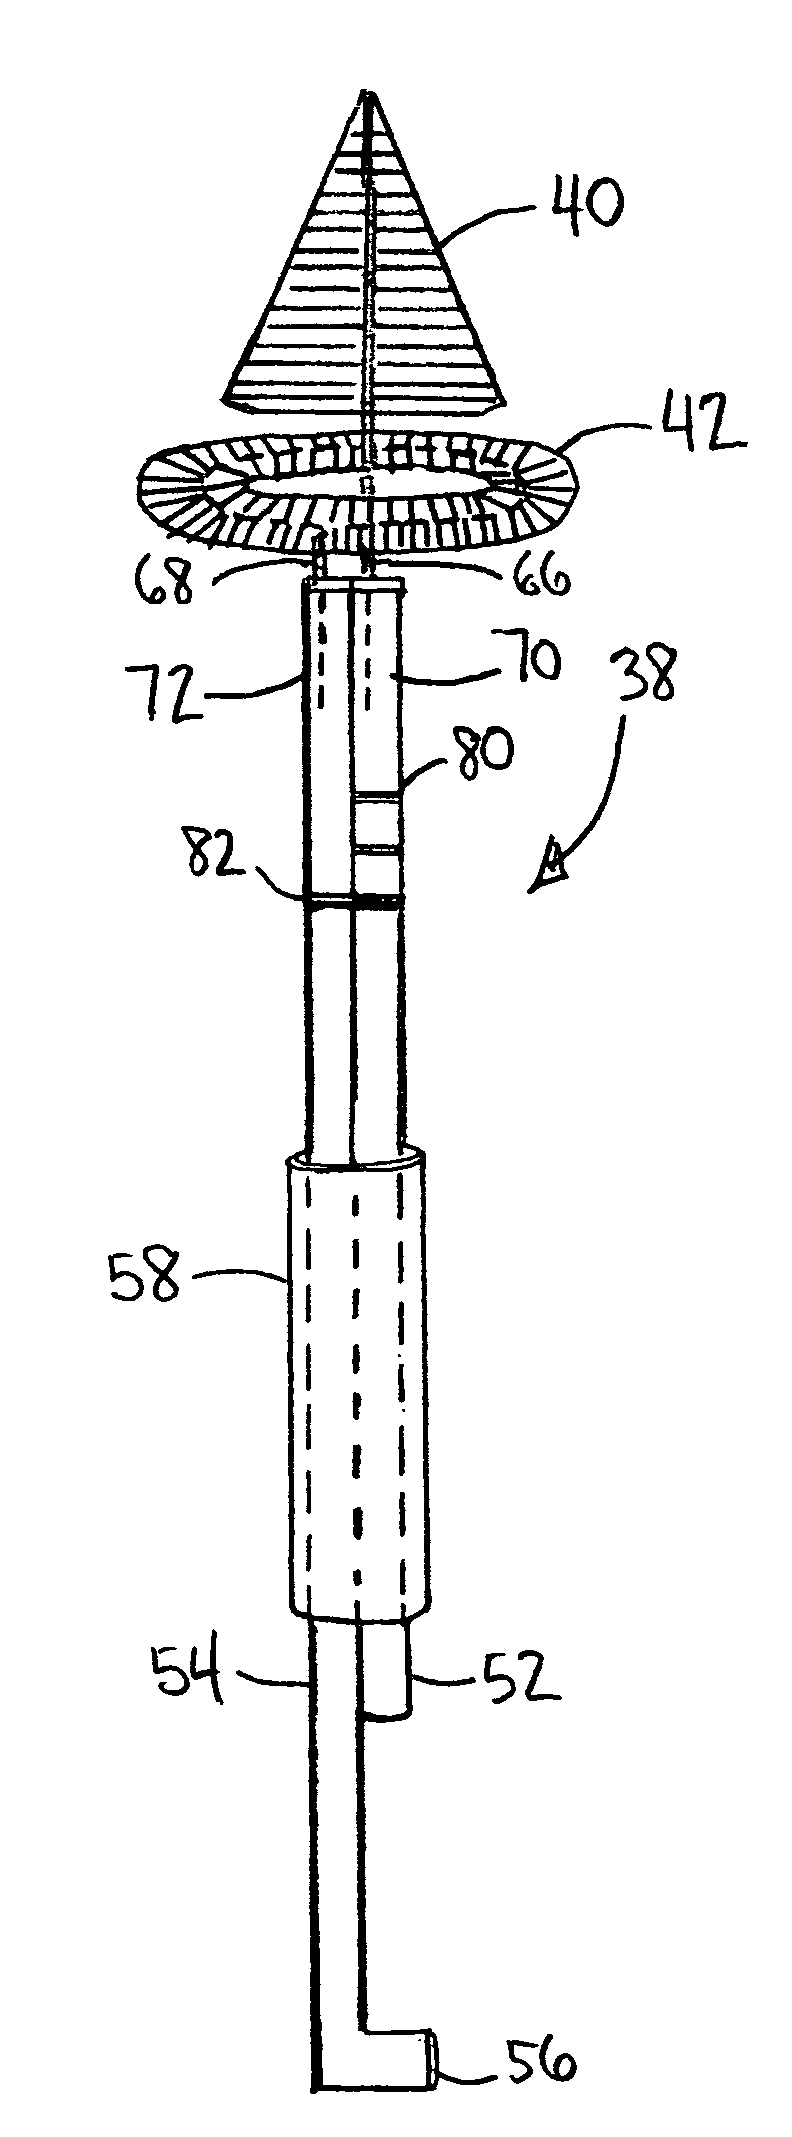 Adjustable dual-brush cervical cytology collection device